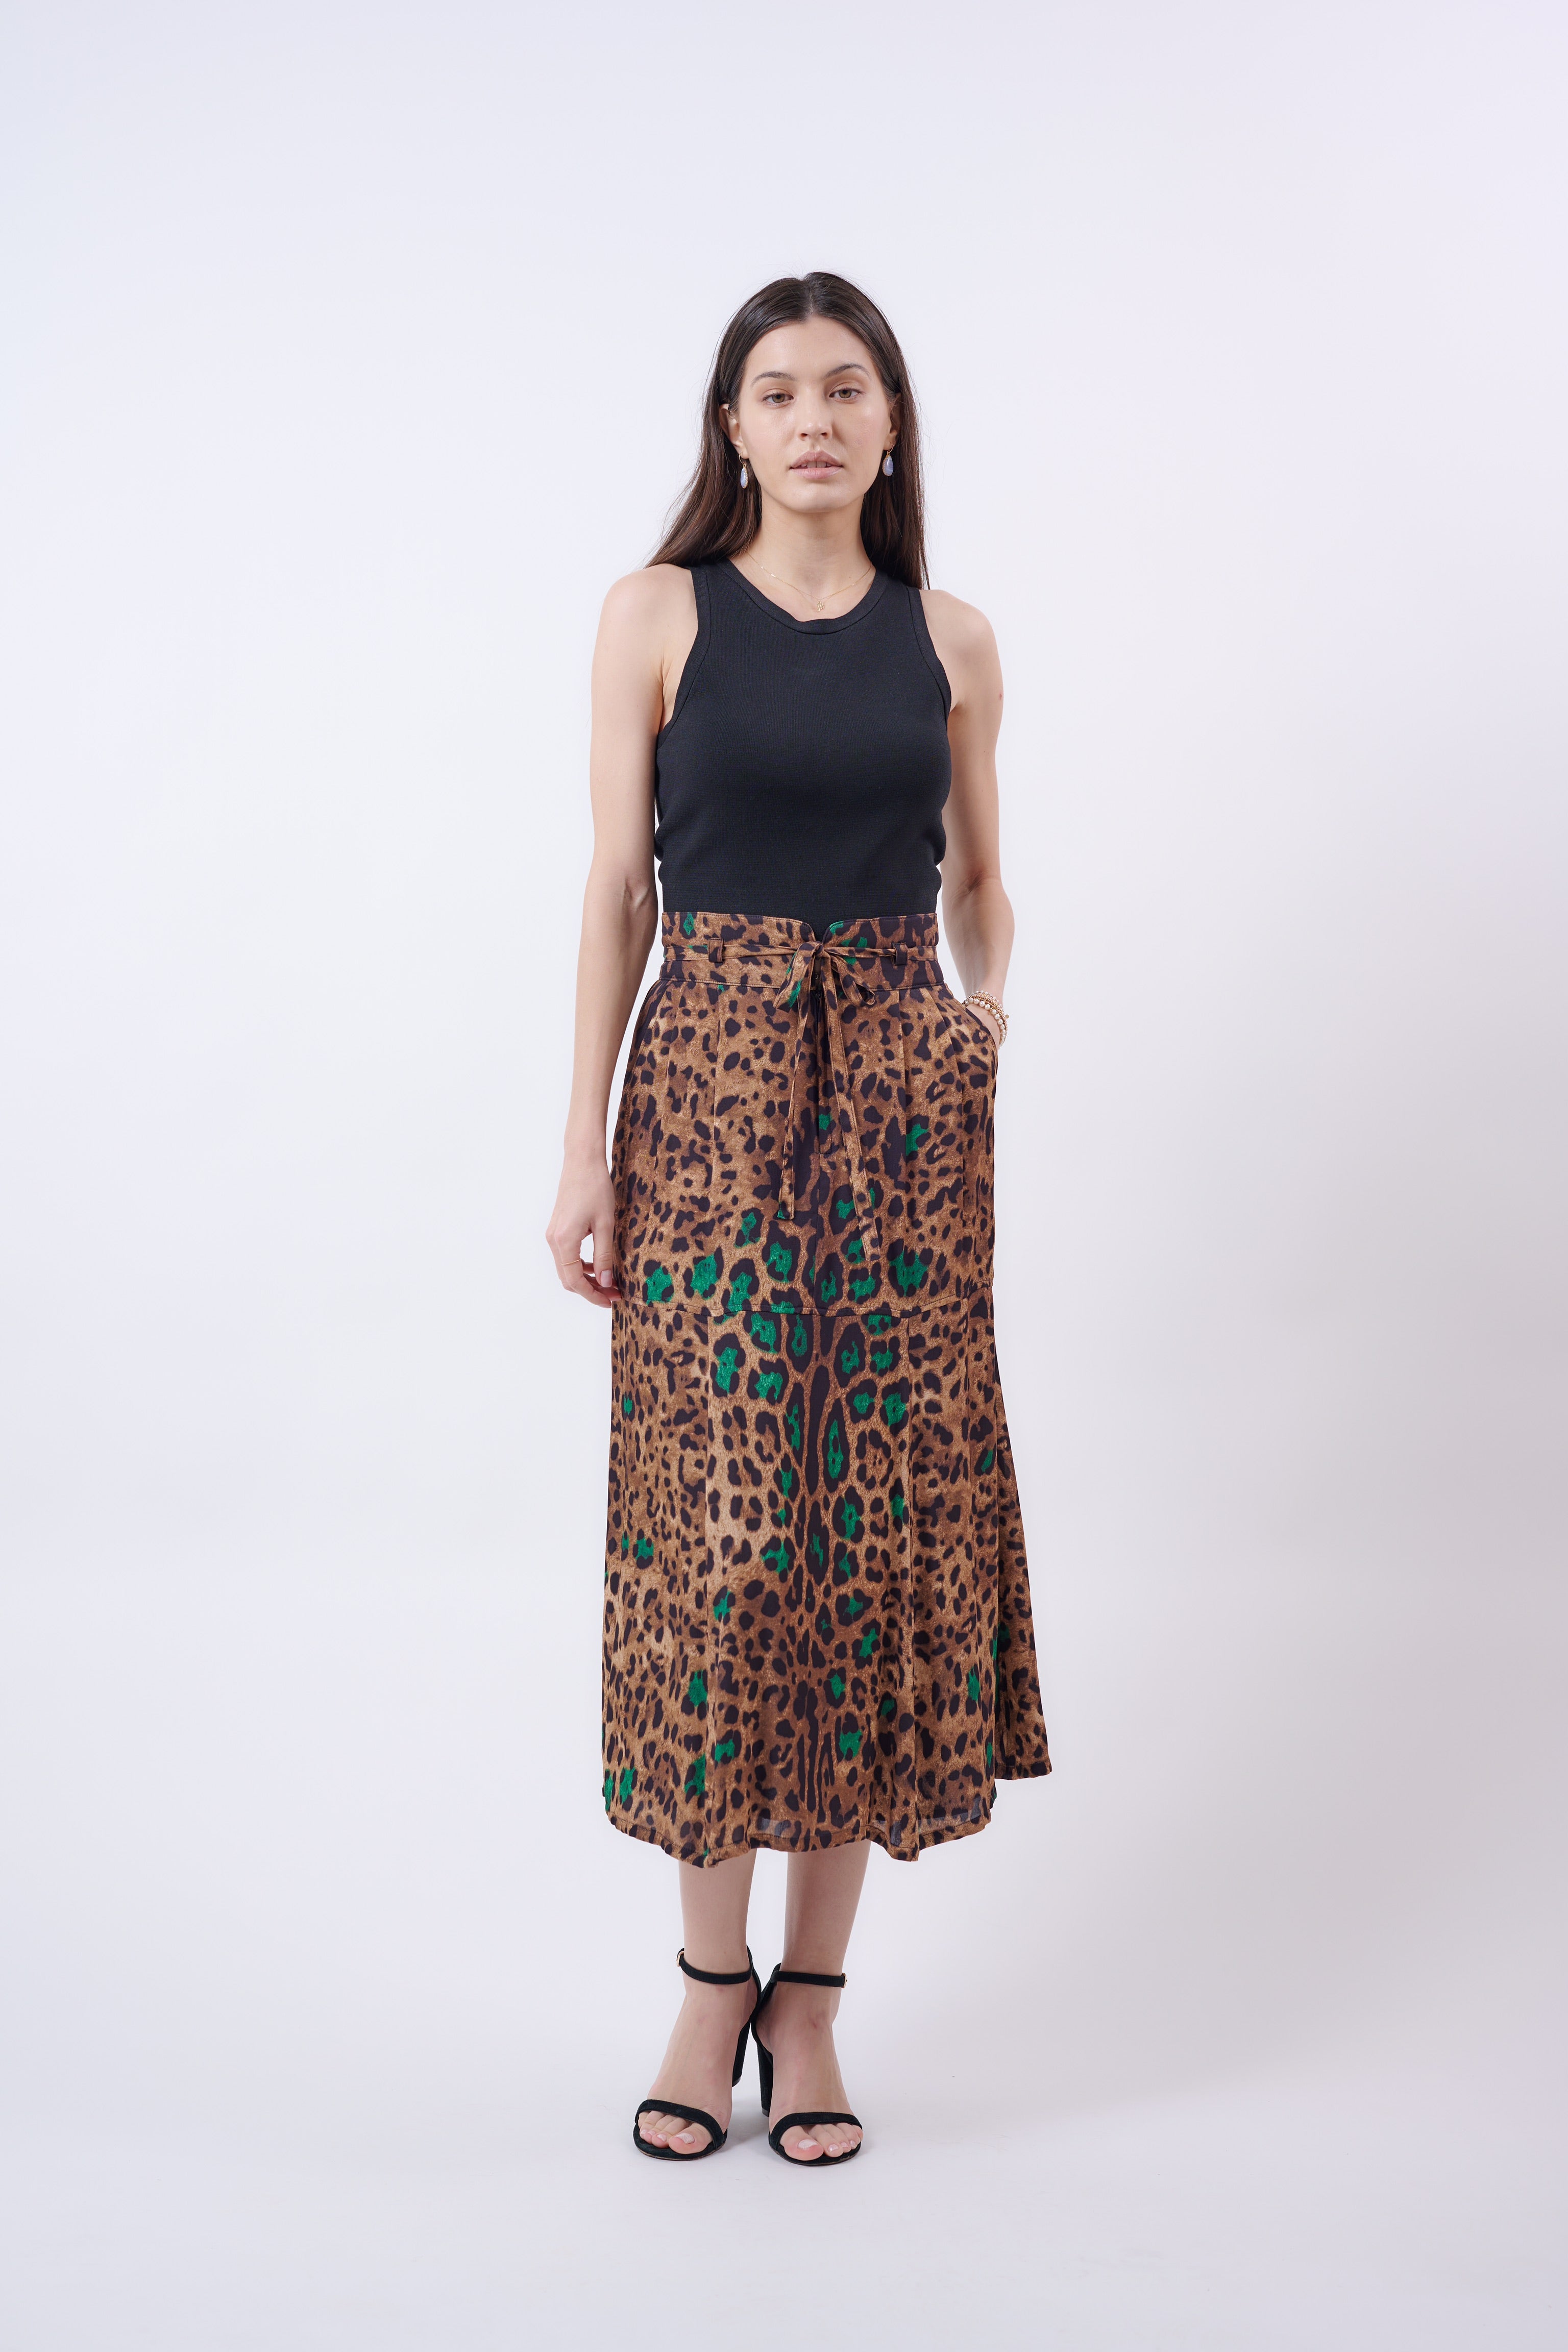 Elevate Your Look with LORNA Leopard Print Skirt